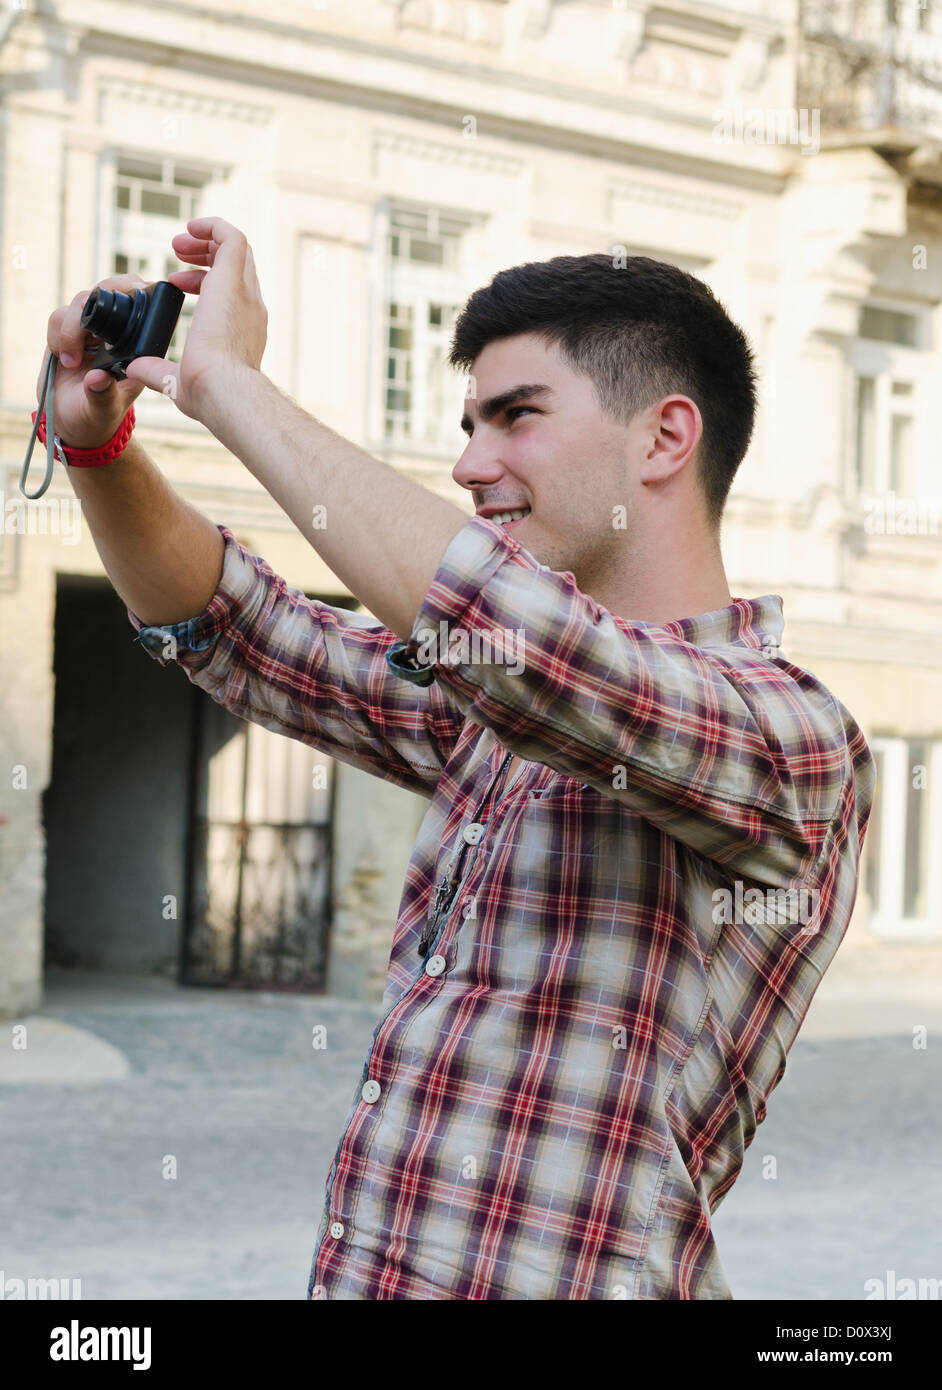 Smiling young man standing outdoors in an urban environment taking a photograph Stock Photo